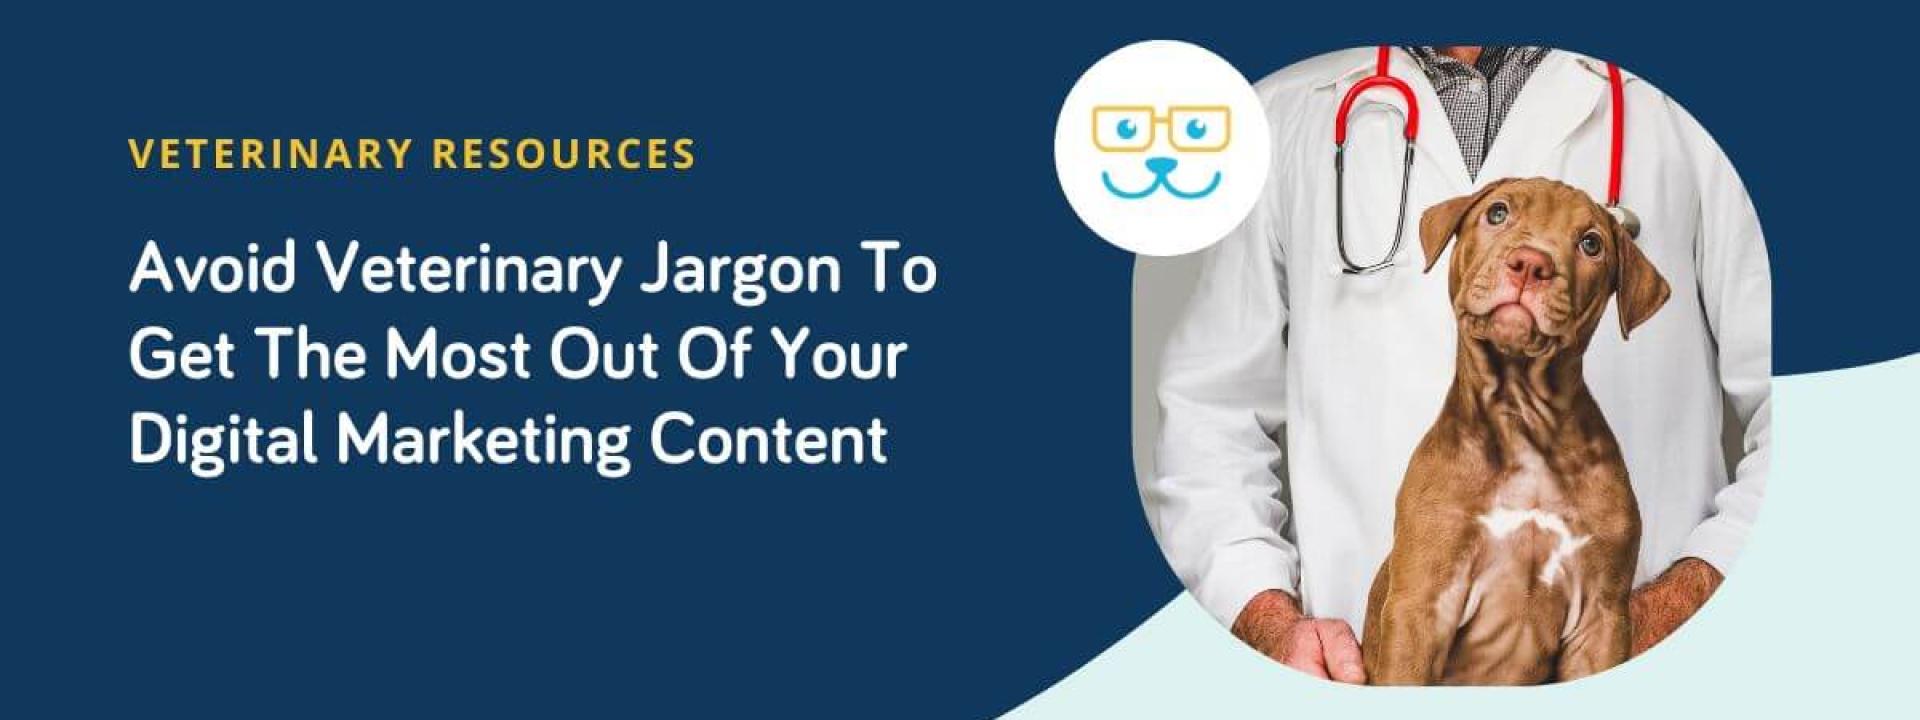 Avoid Veterinary Jargon To Get The Most Out Of Your Digital Marketing Content